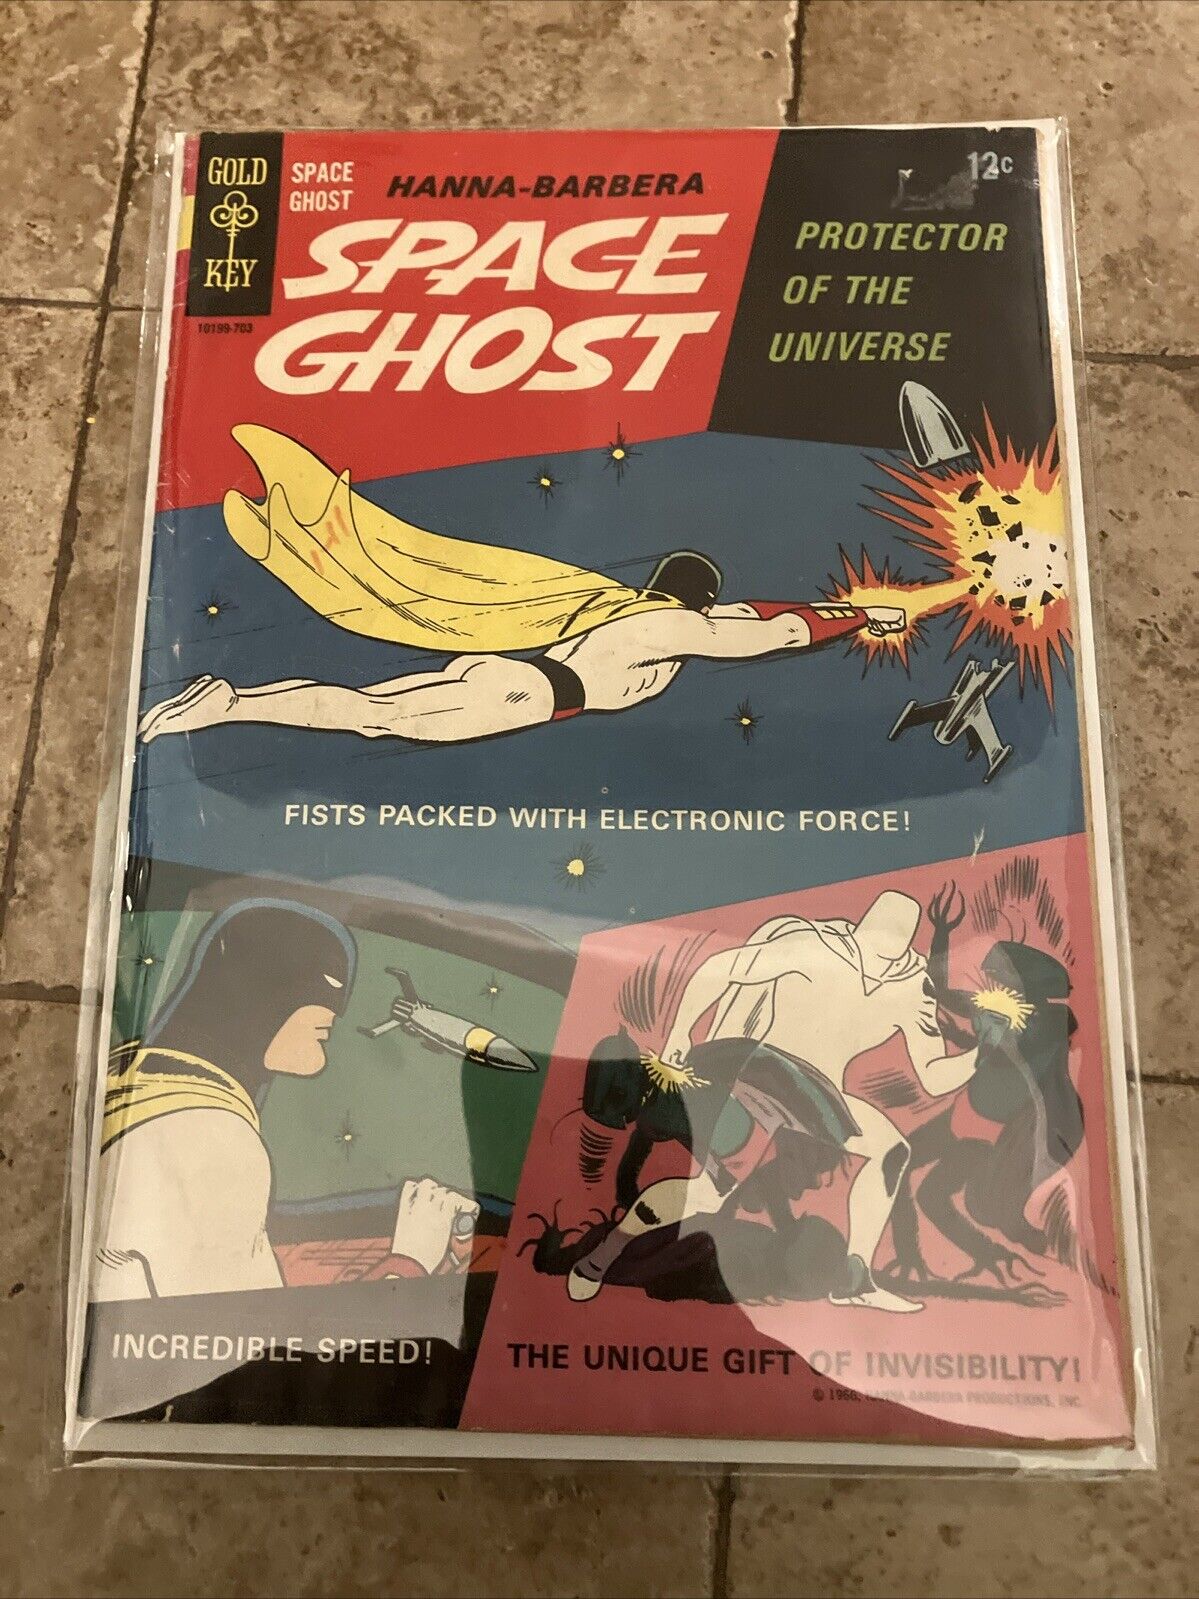 Space Ghost 1 gold key comics, Rare Silver Age Key, 1966, First Appearance